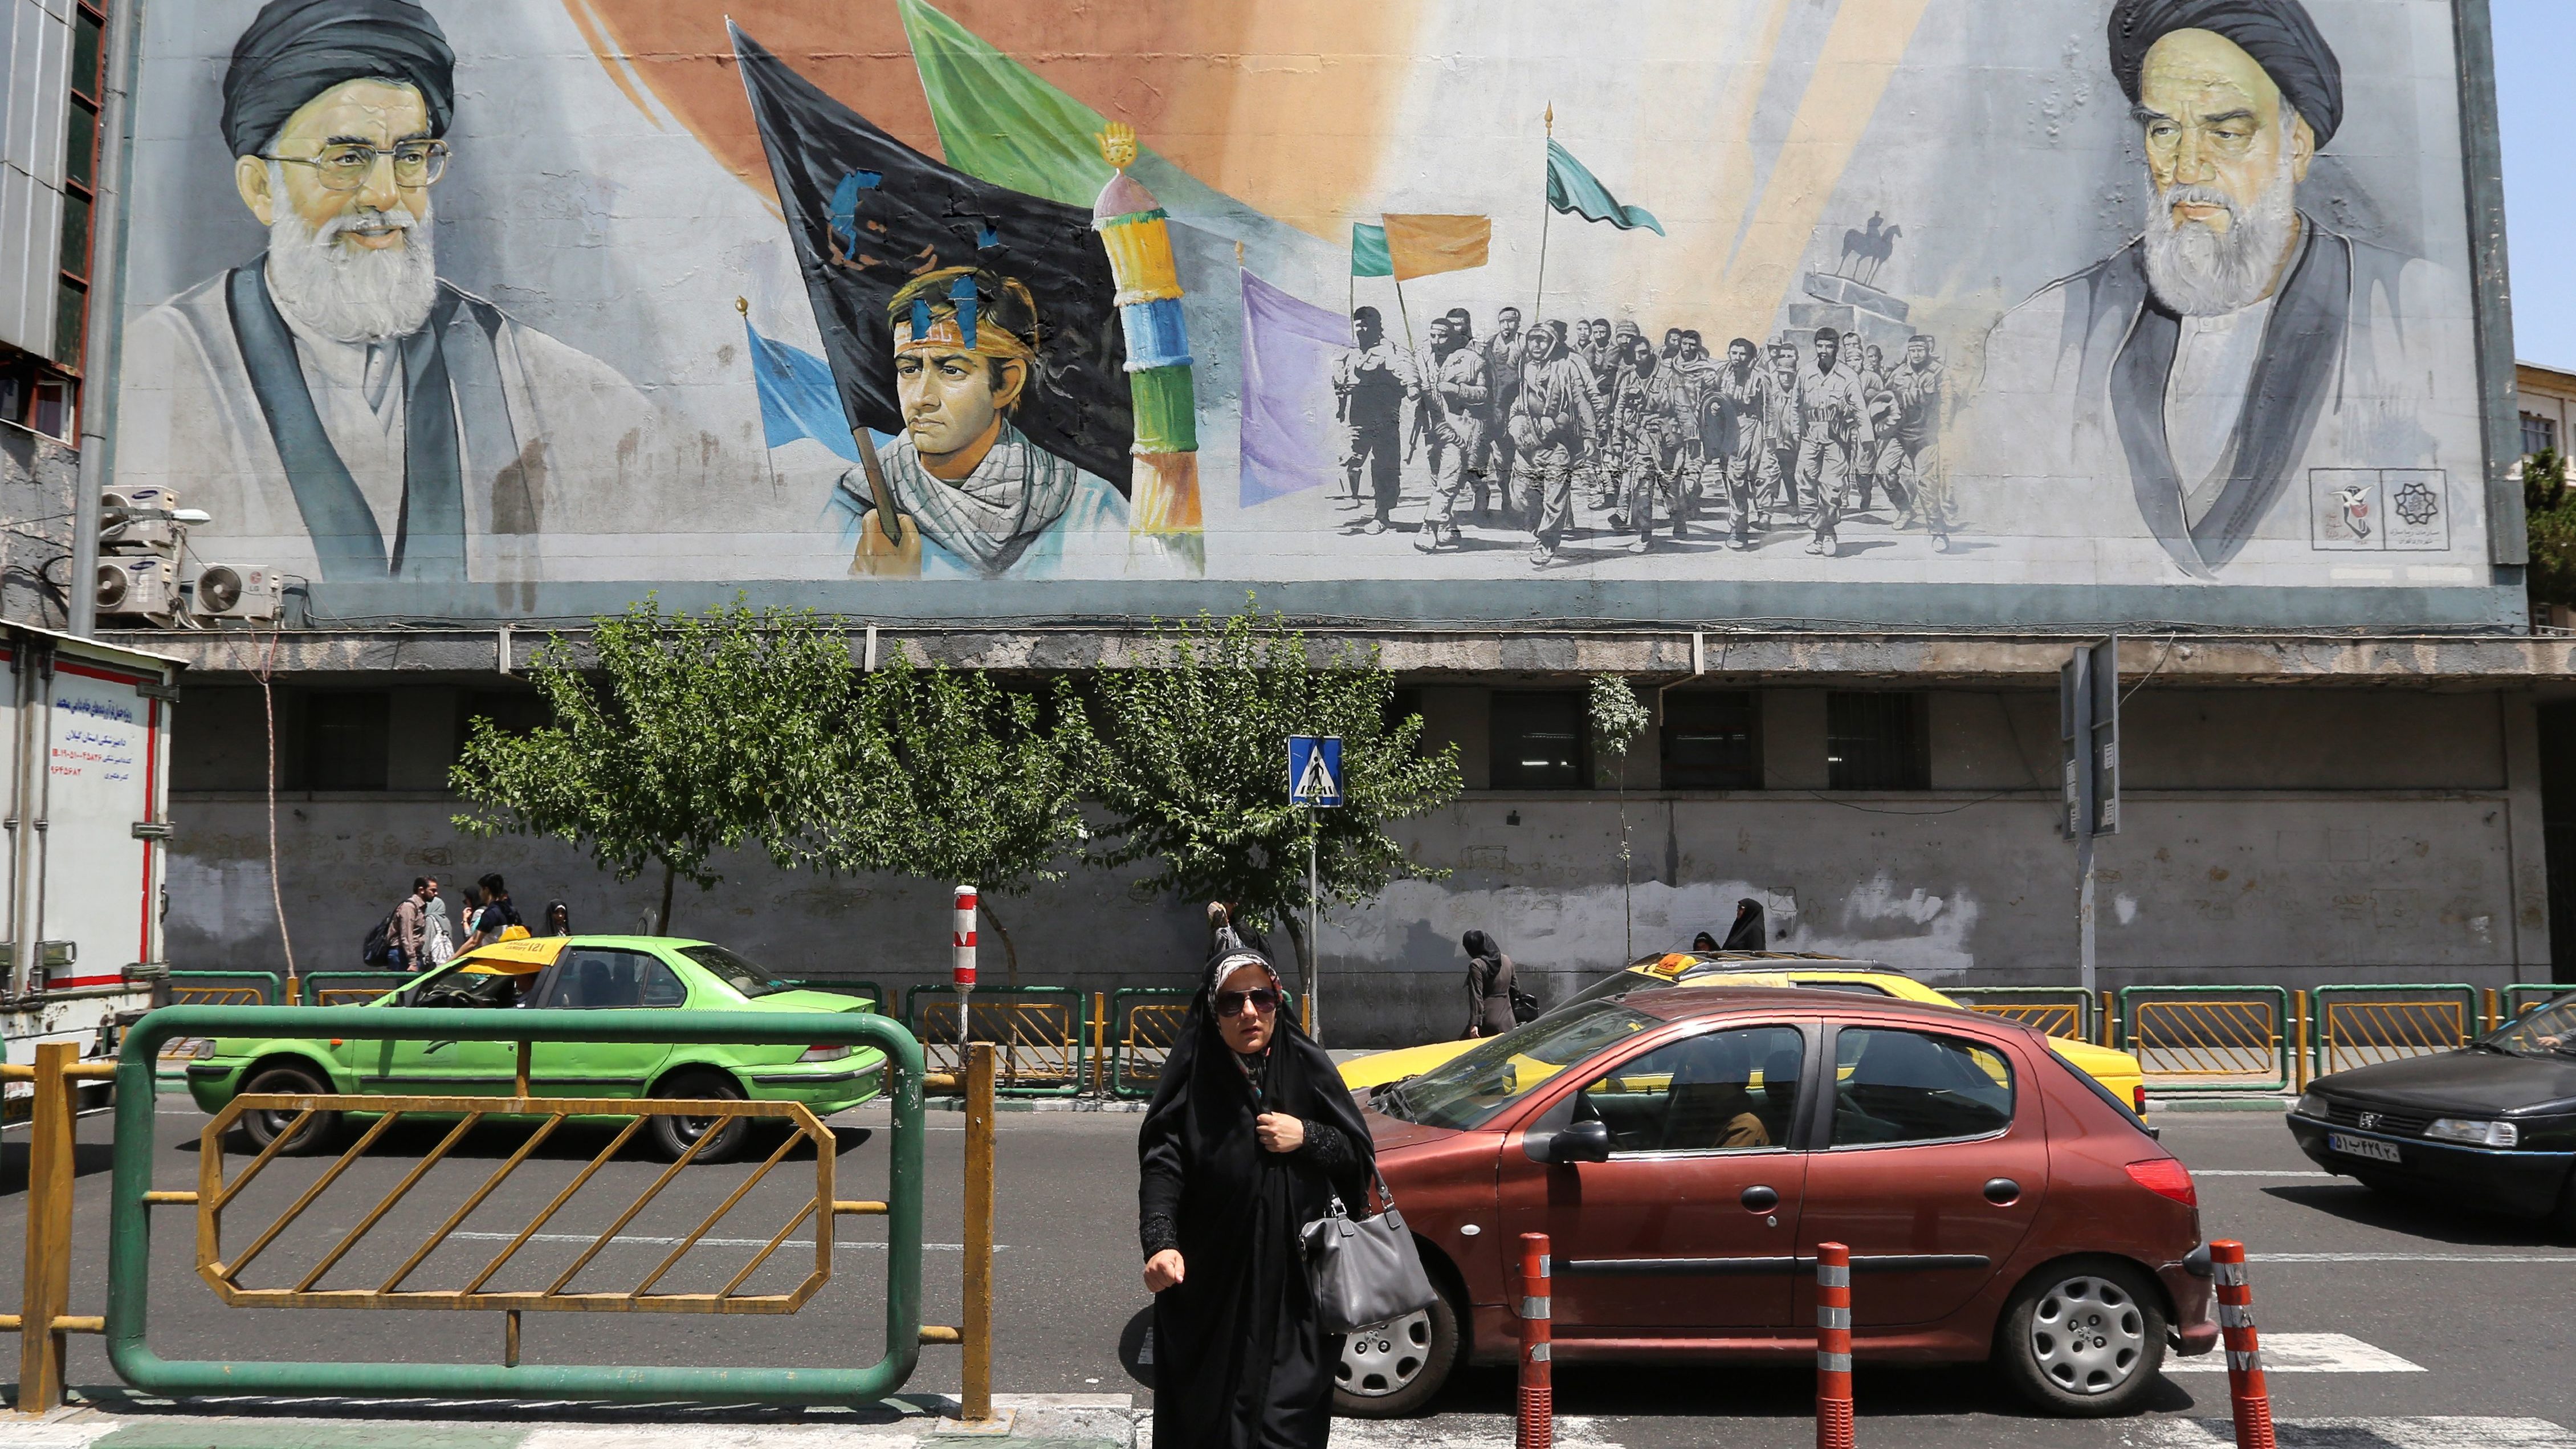 The Iranian Regime’s Days are Numbered